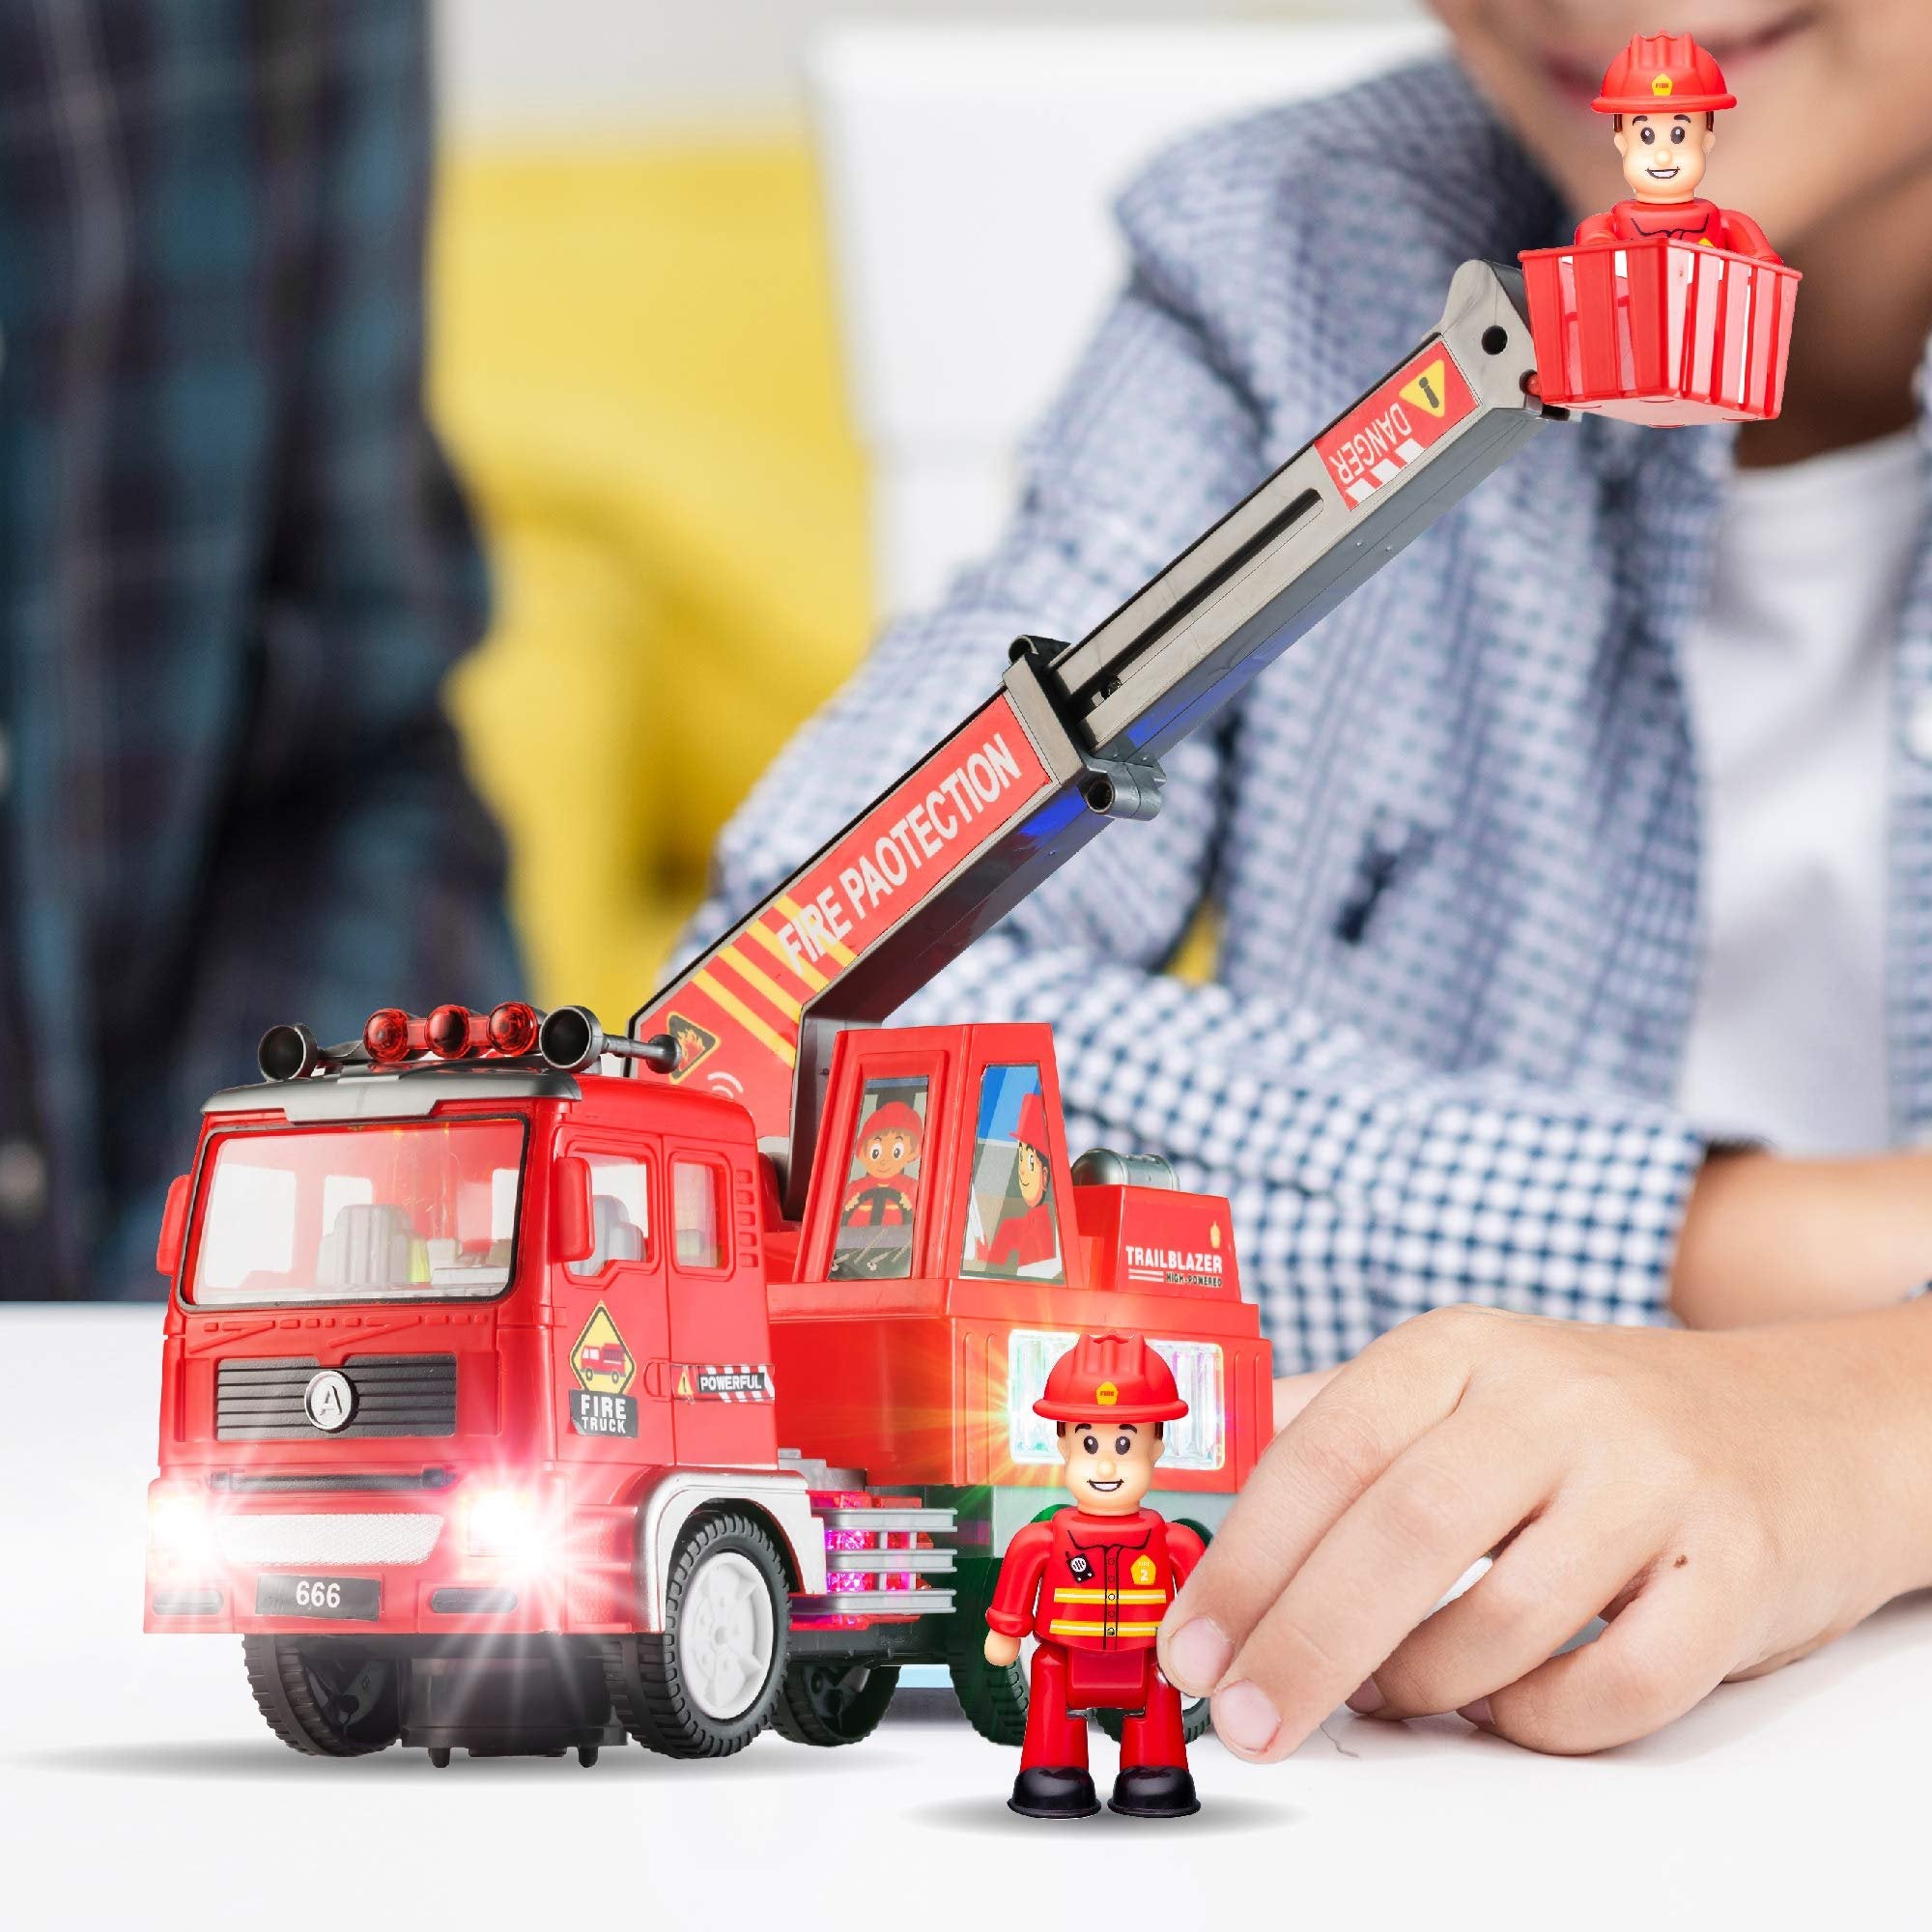 Zetz Brands Fire Engine Ladder Truck for Kids with Two Fireman Figures - 4d Lights & Real Siren Sounds | Bump and Go Toy - Automatic Steering On Contact - Imaginative Play